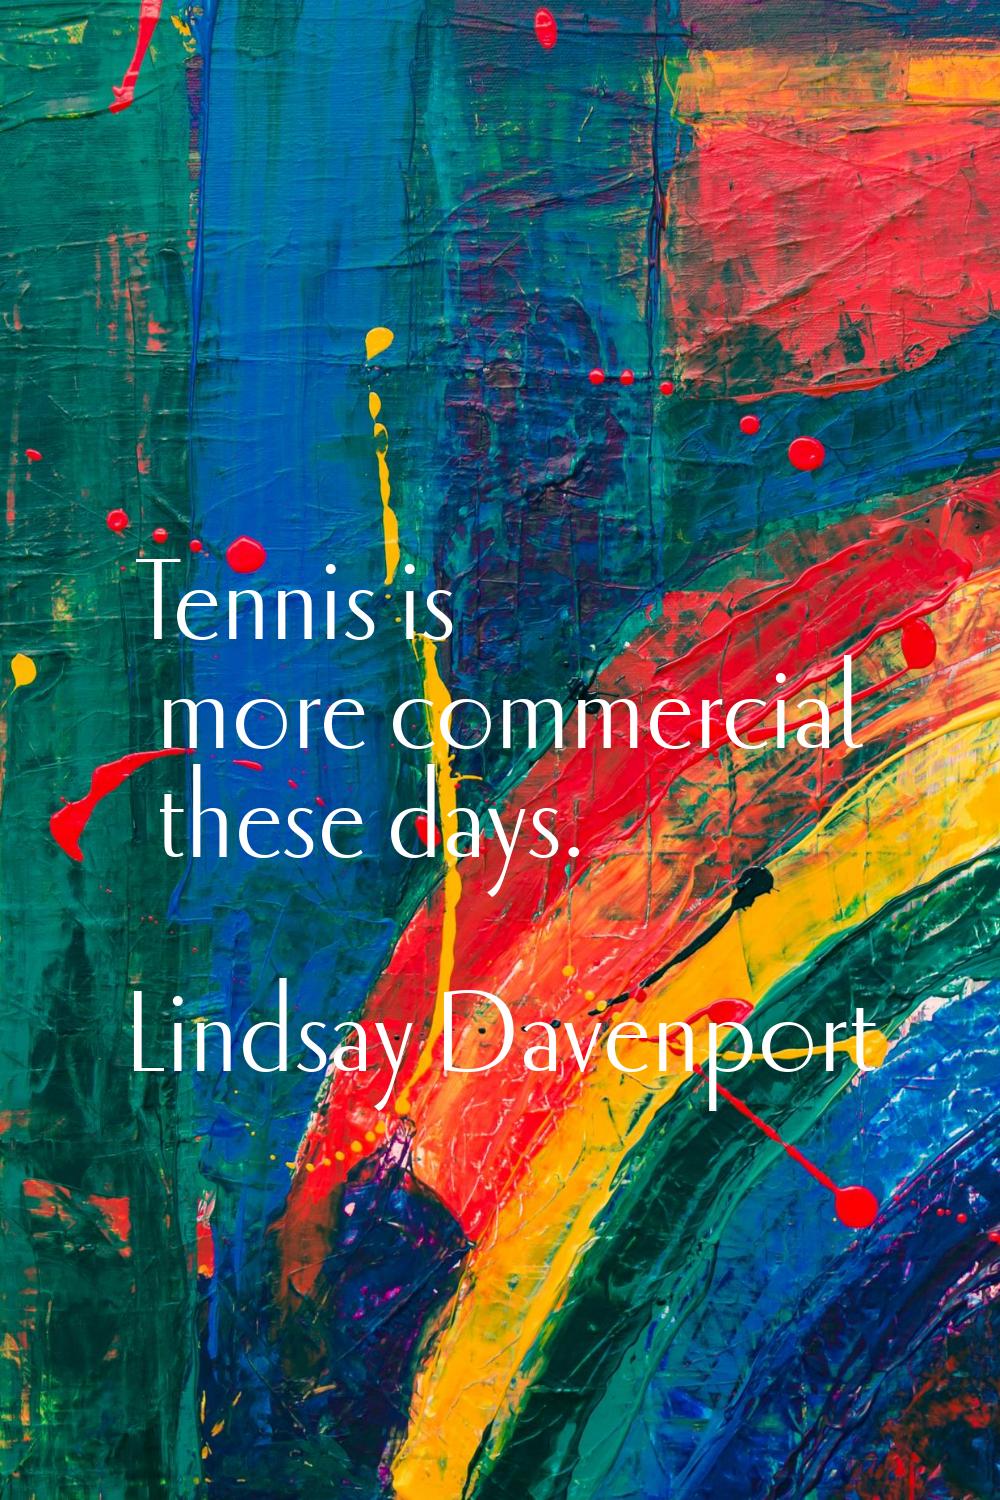 Tennis is more commercial these days.